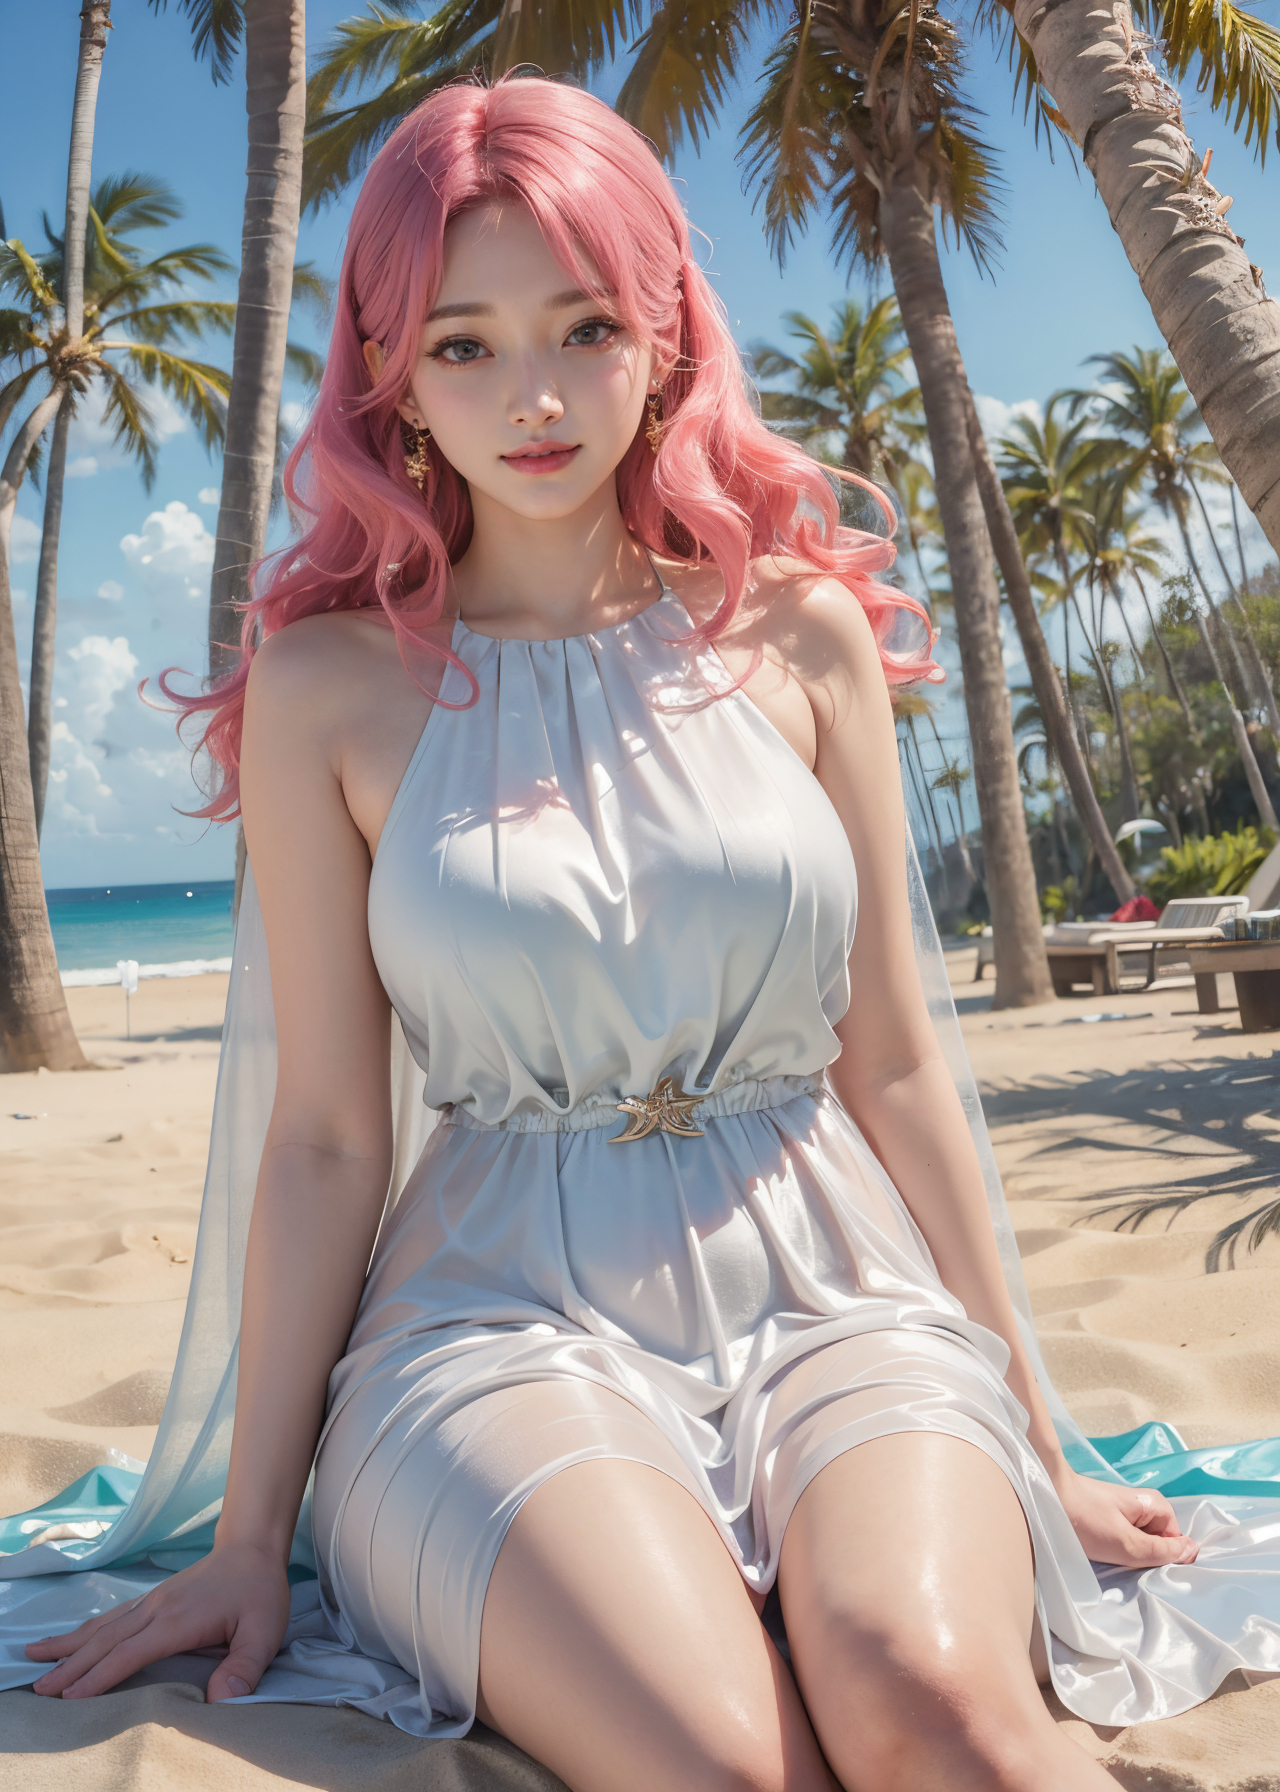 General 1280x1792 AI art women thick thigh big boobs looking at viewer collarbone illustration gown artwork digital art AIbot palm trees beach pink hair dress white dress smiling water clouds portrait display sitting sand earring